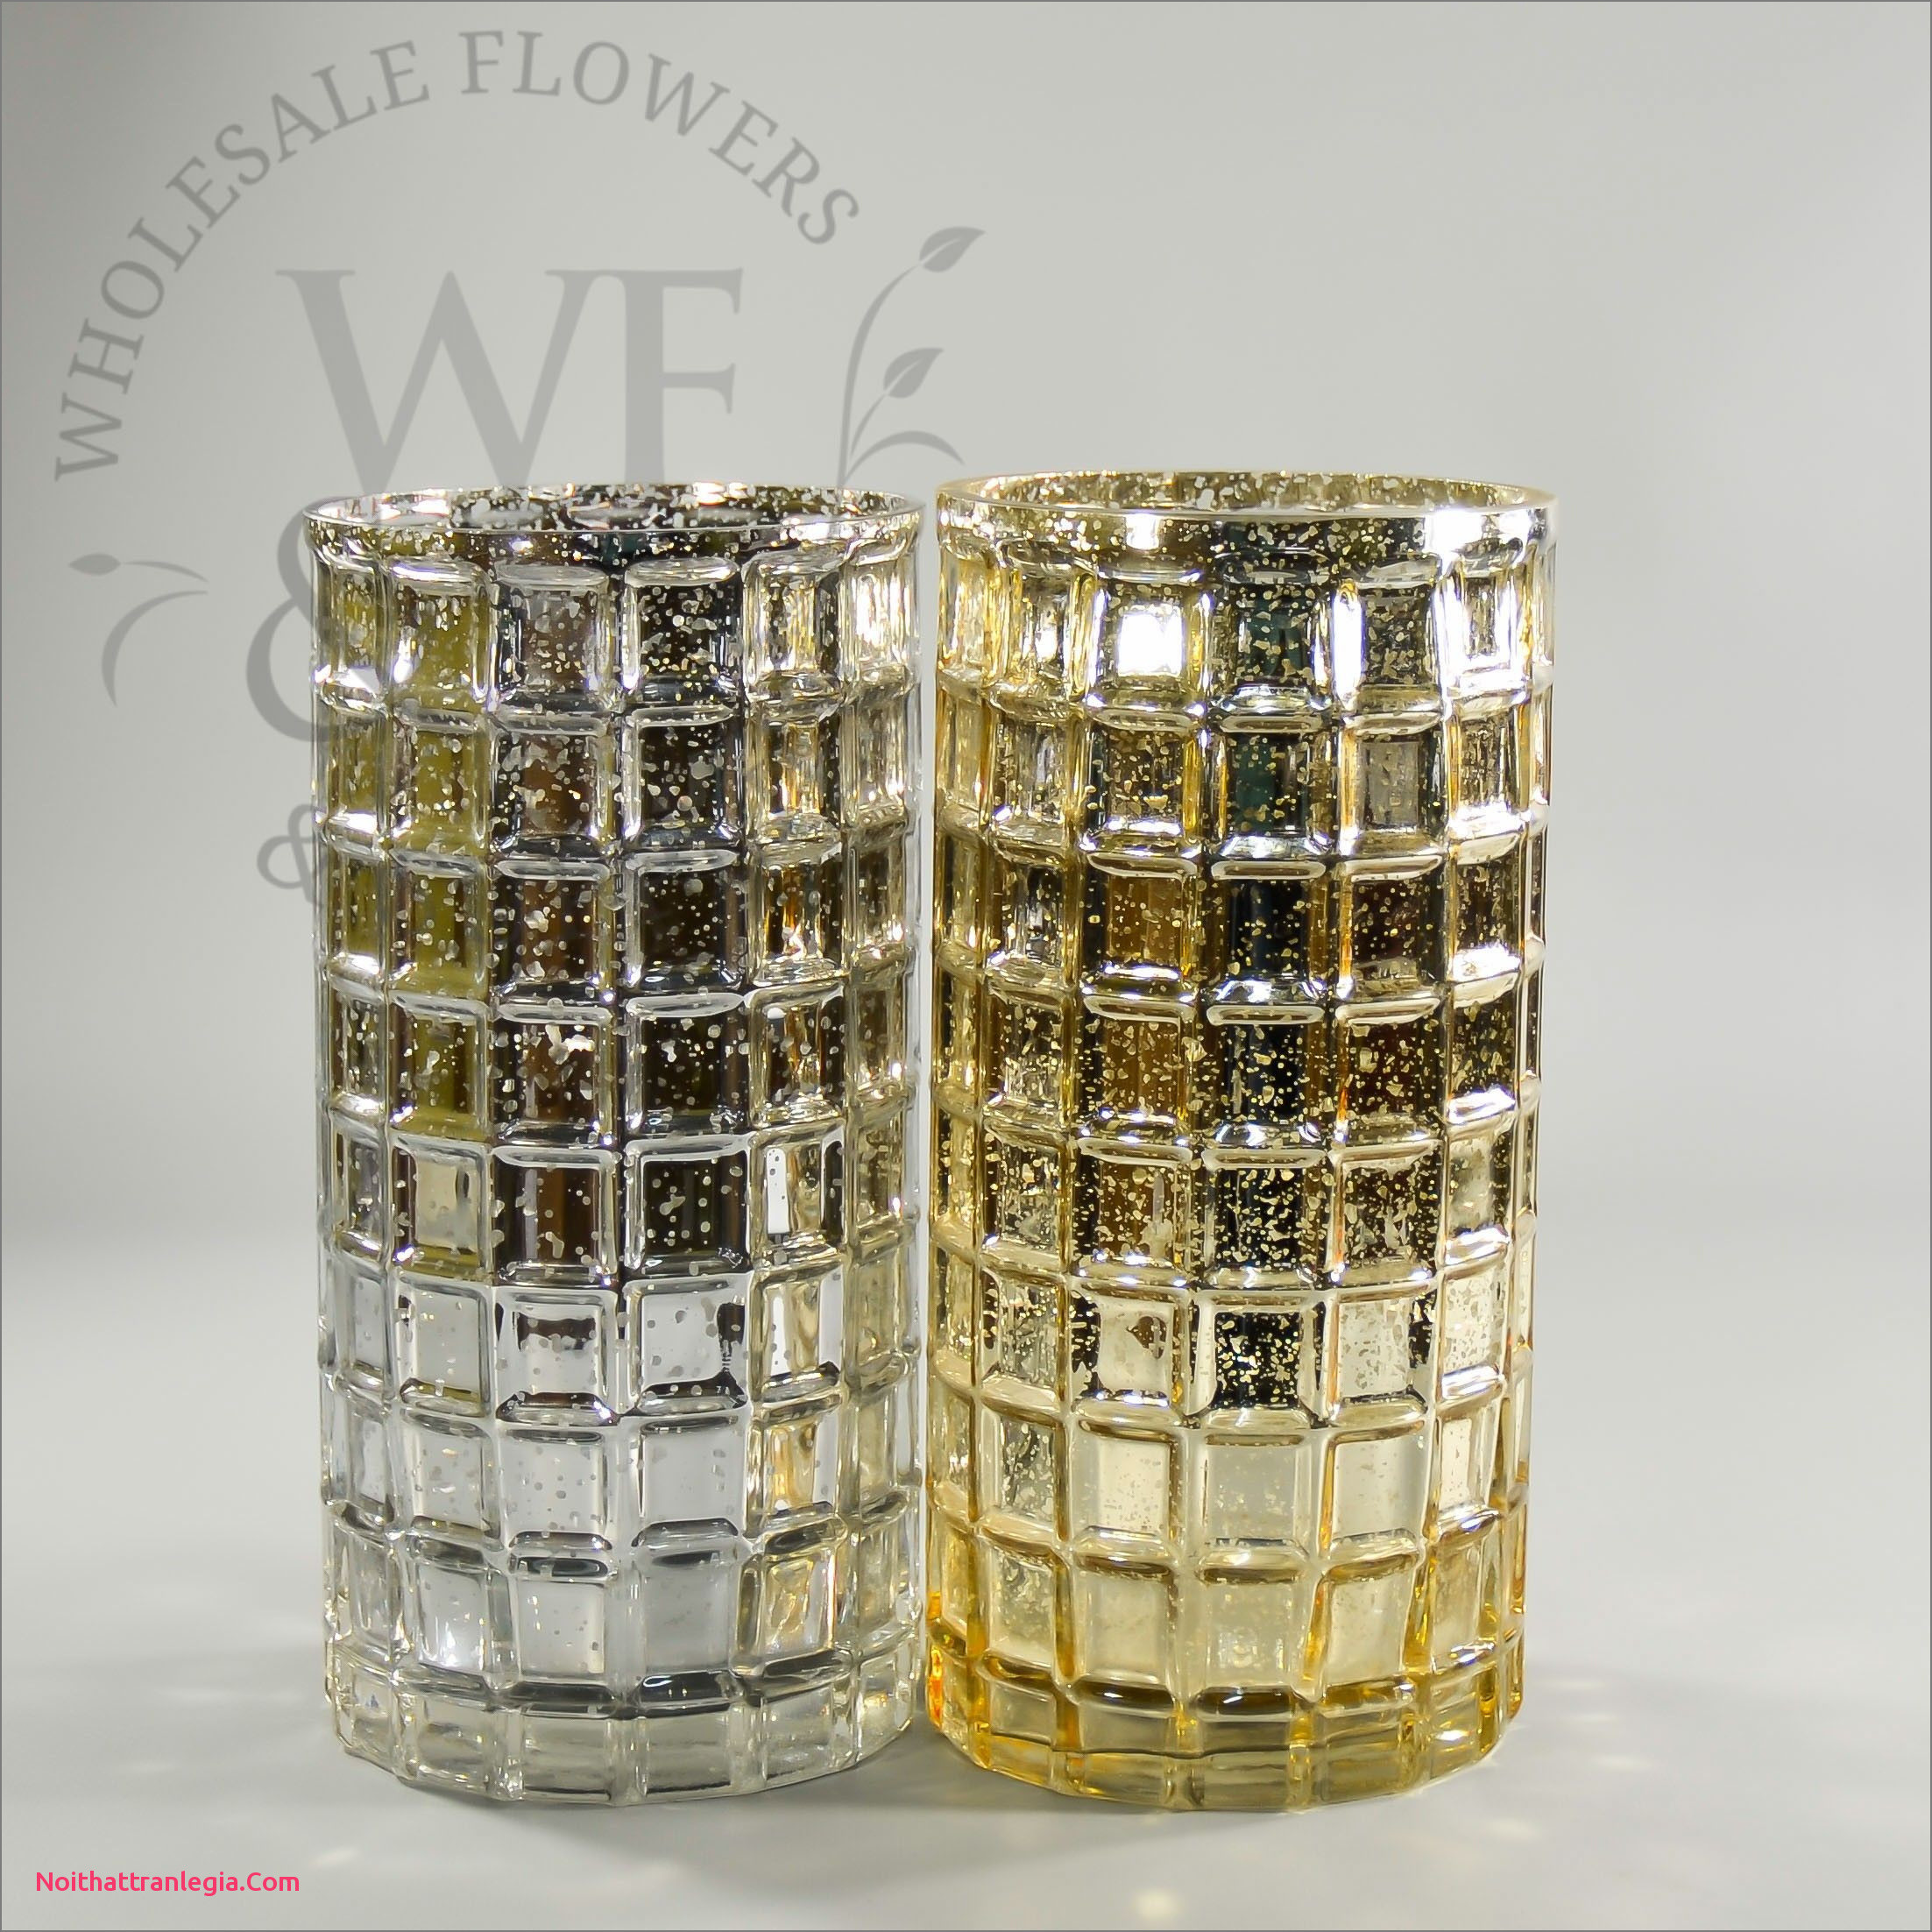 13 Fabulous Blown Glass Vases wholesale 2022 free download blown glass vases wholesale of 20 how to make mercury glass vases noithattranlegia vases design with mercury glass mosaic cylinder vase in silver and gold 10 tall wholesaleflowersandsupplies